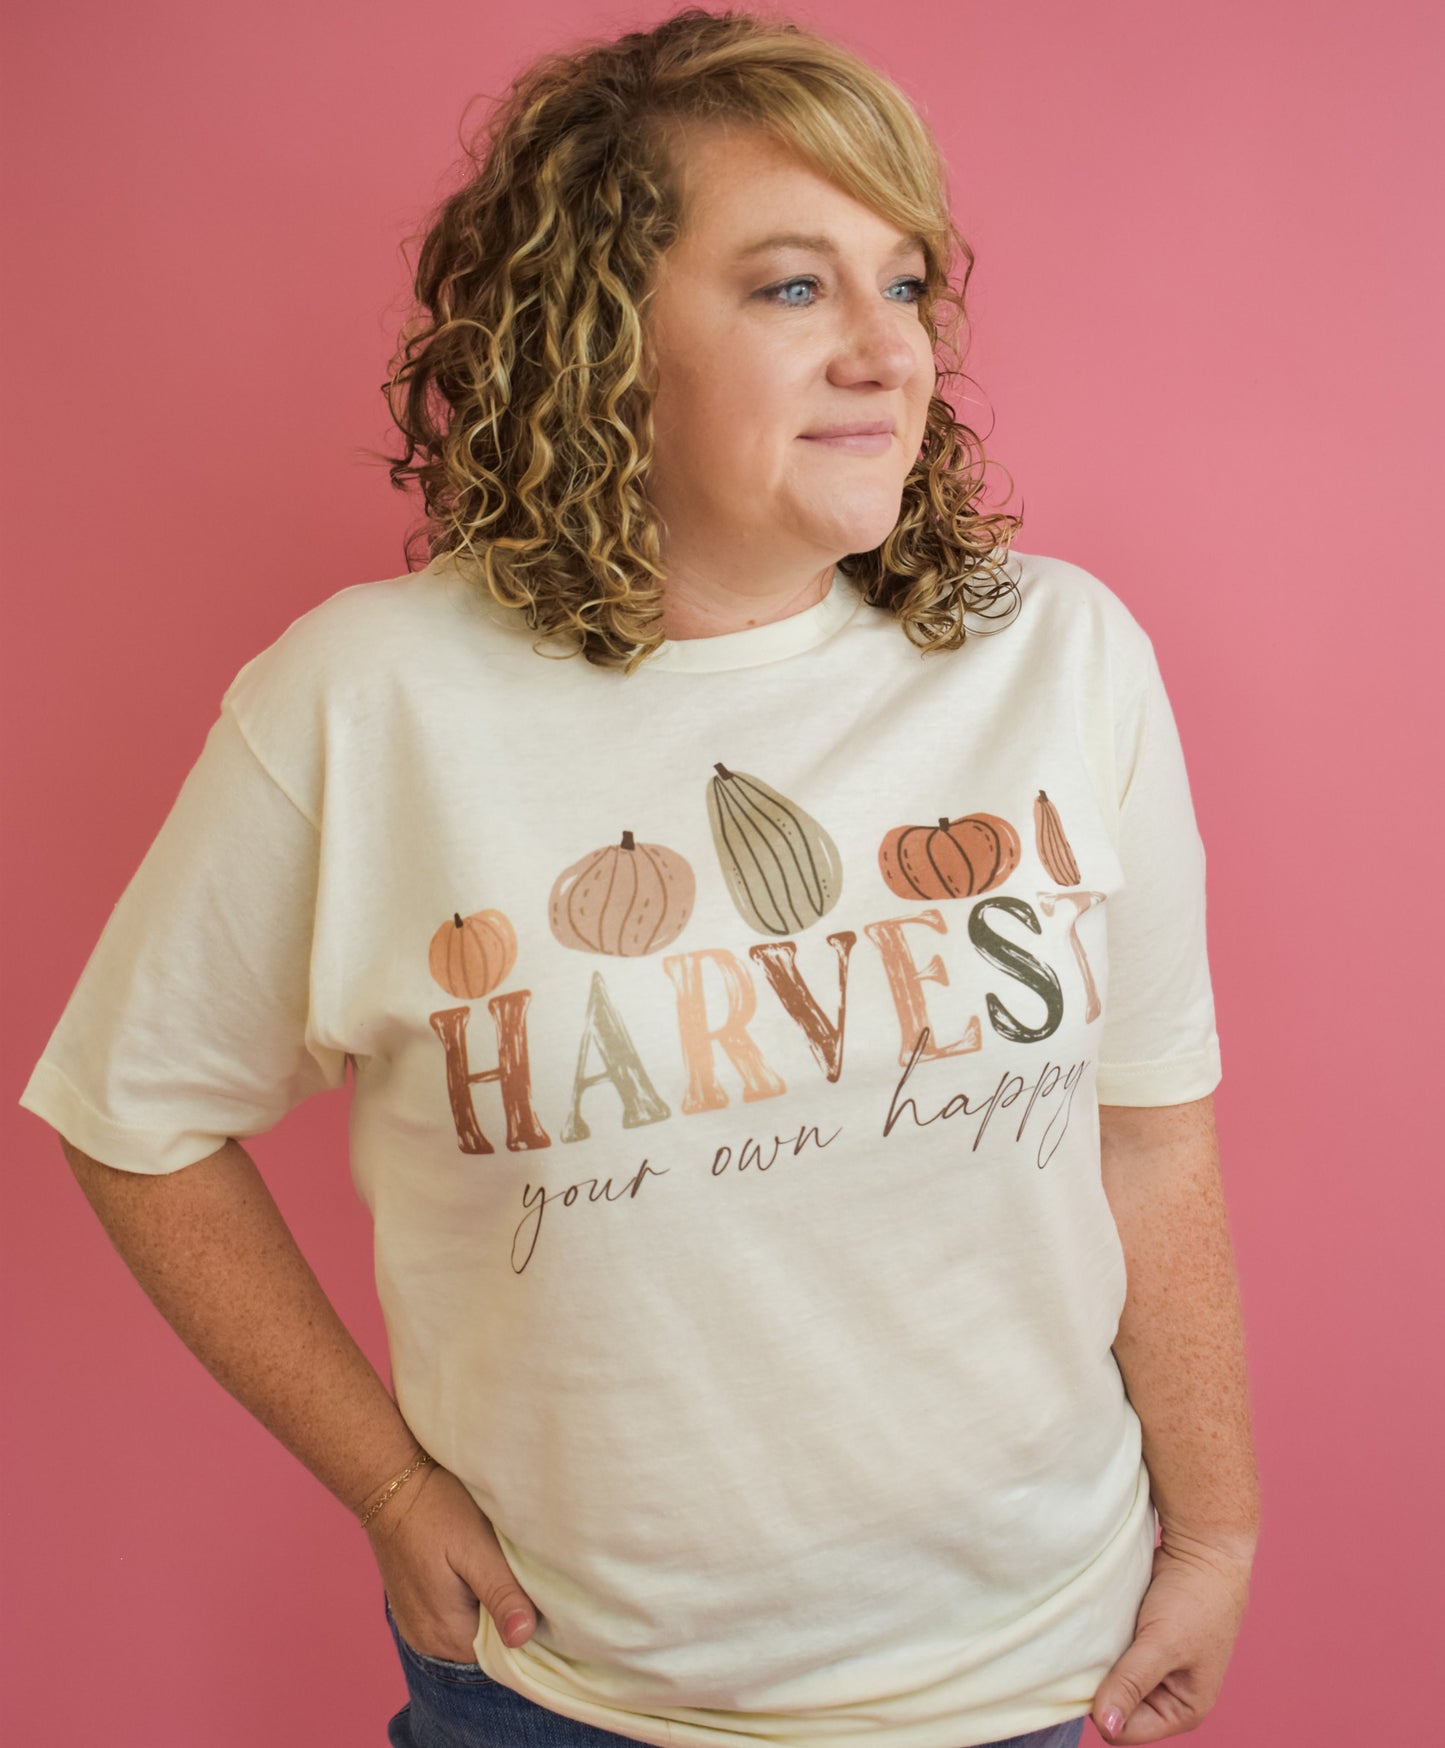 Harvest Your Own Happy Graphic Tee